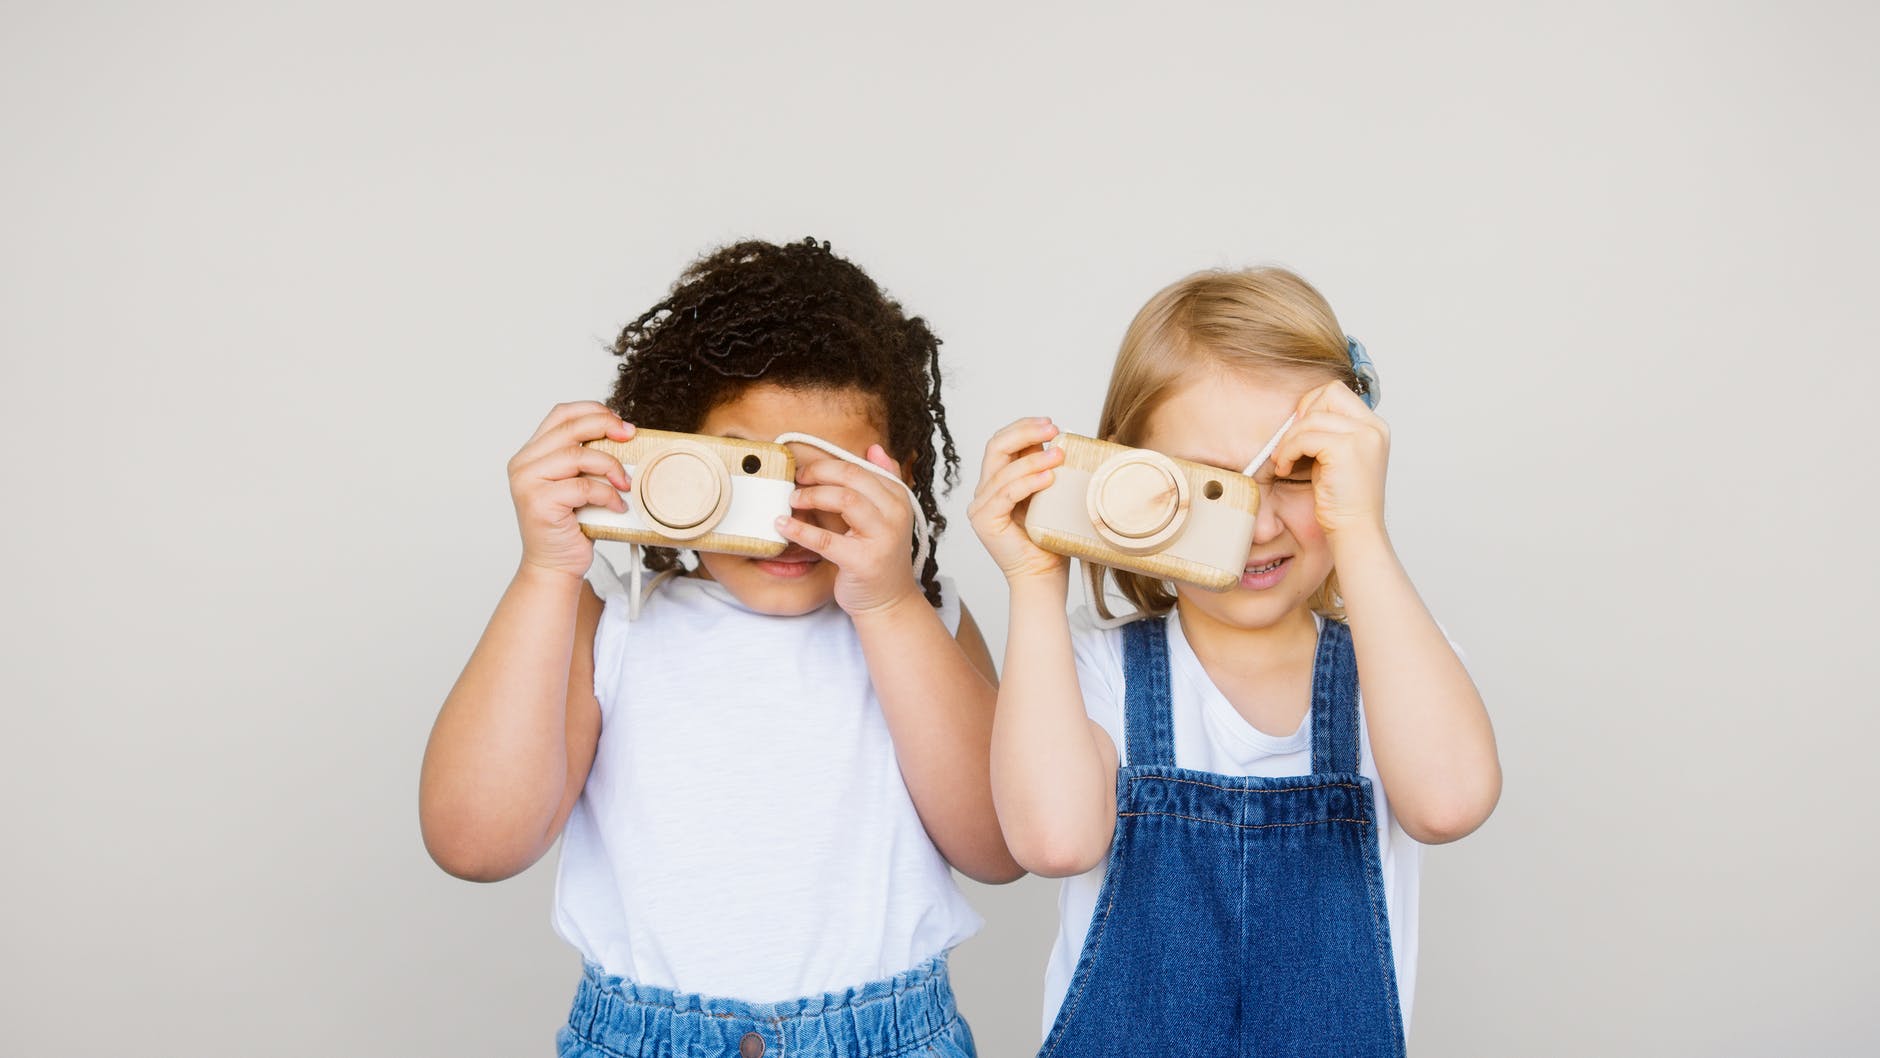 two kids taking photo using a camera